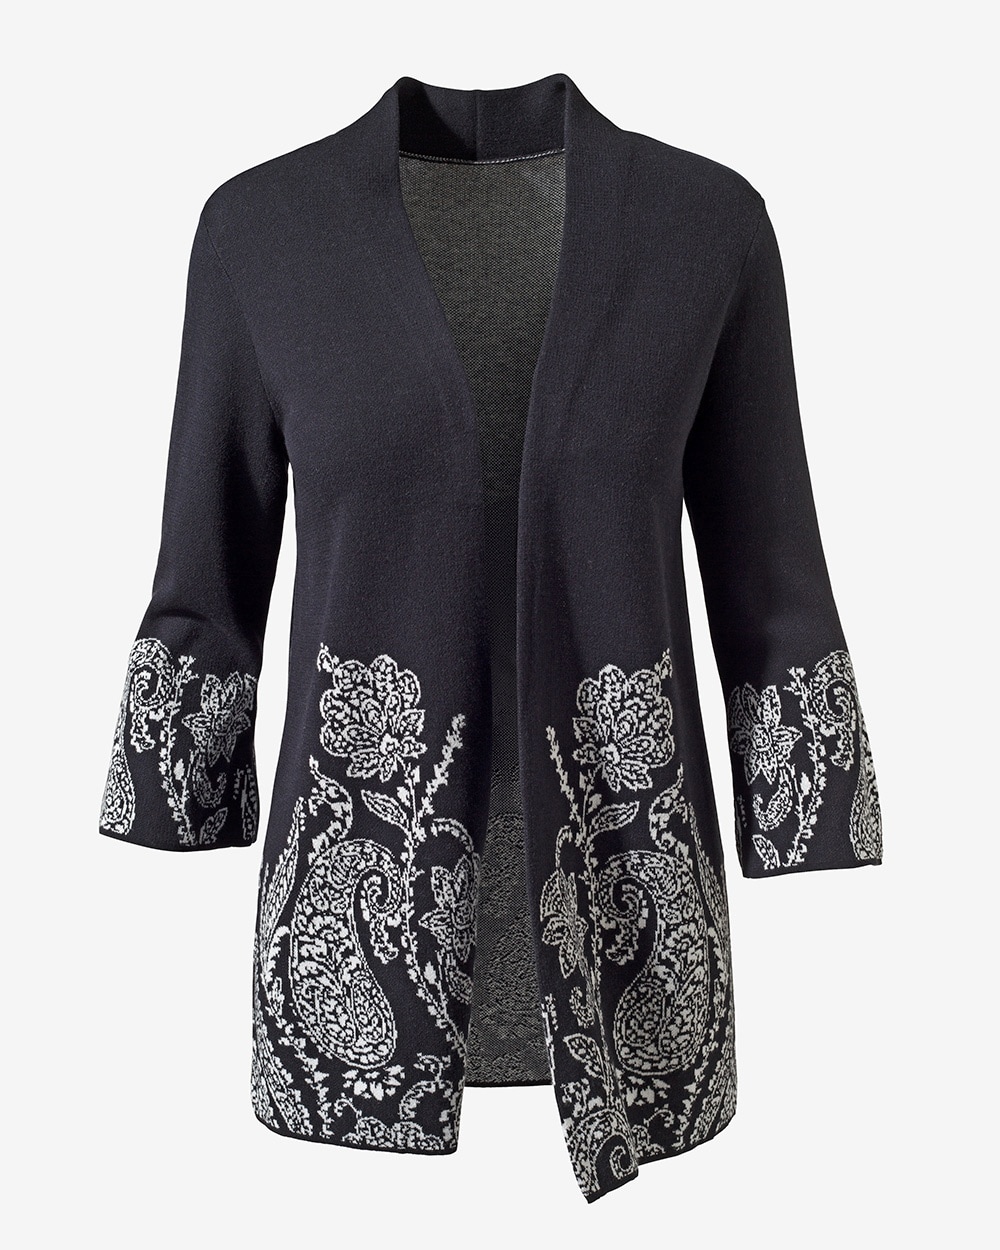 Easywear Floral Paisley Open-Front Long Cardigan